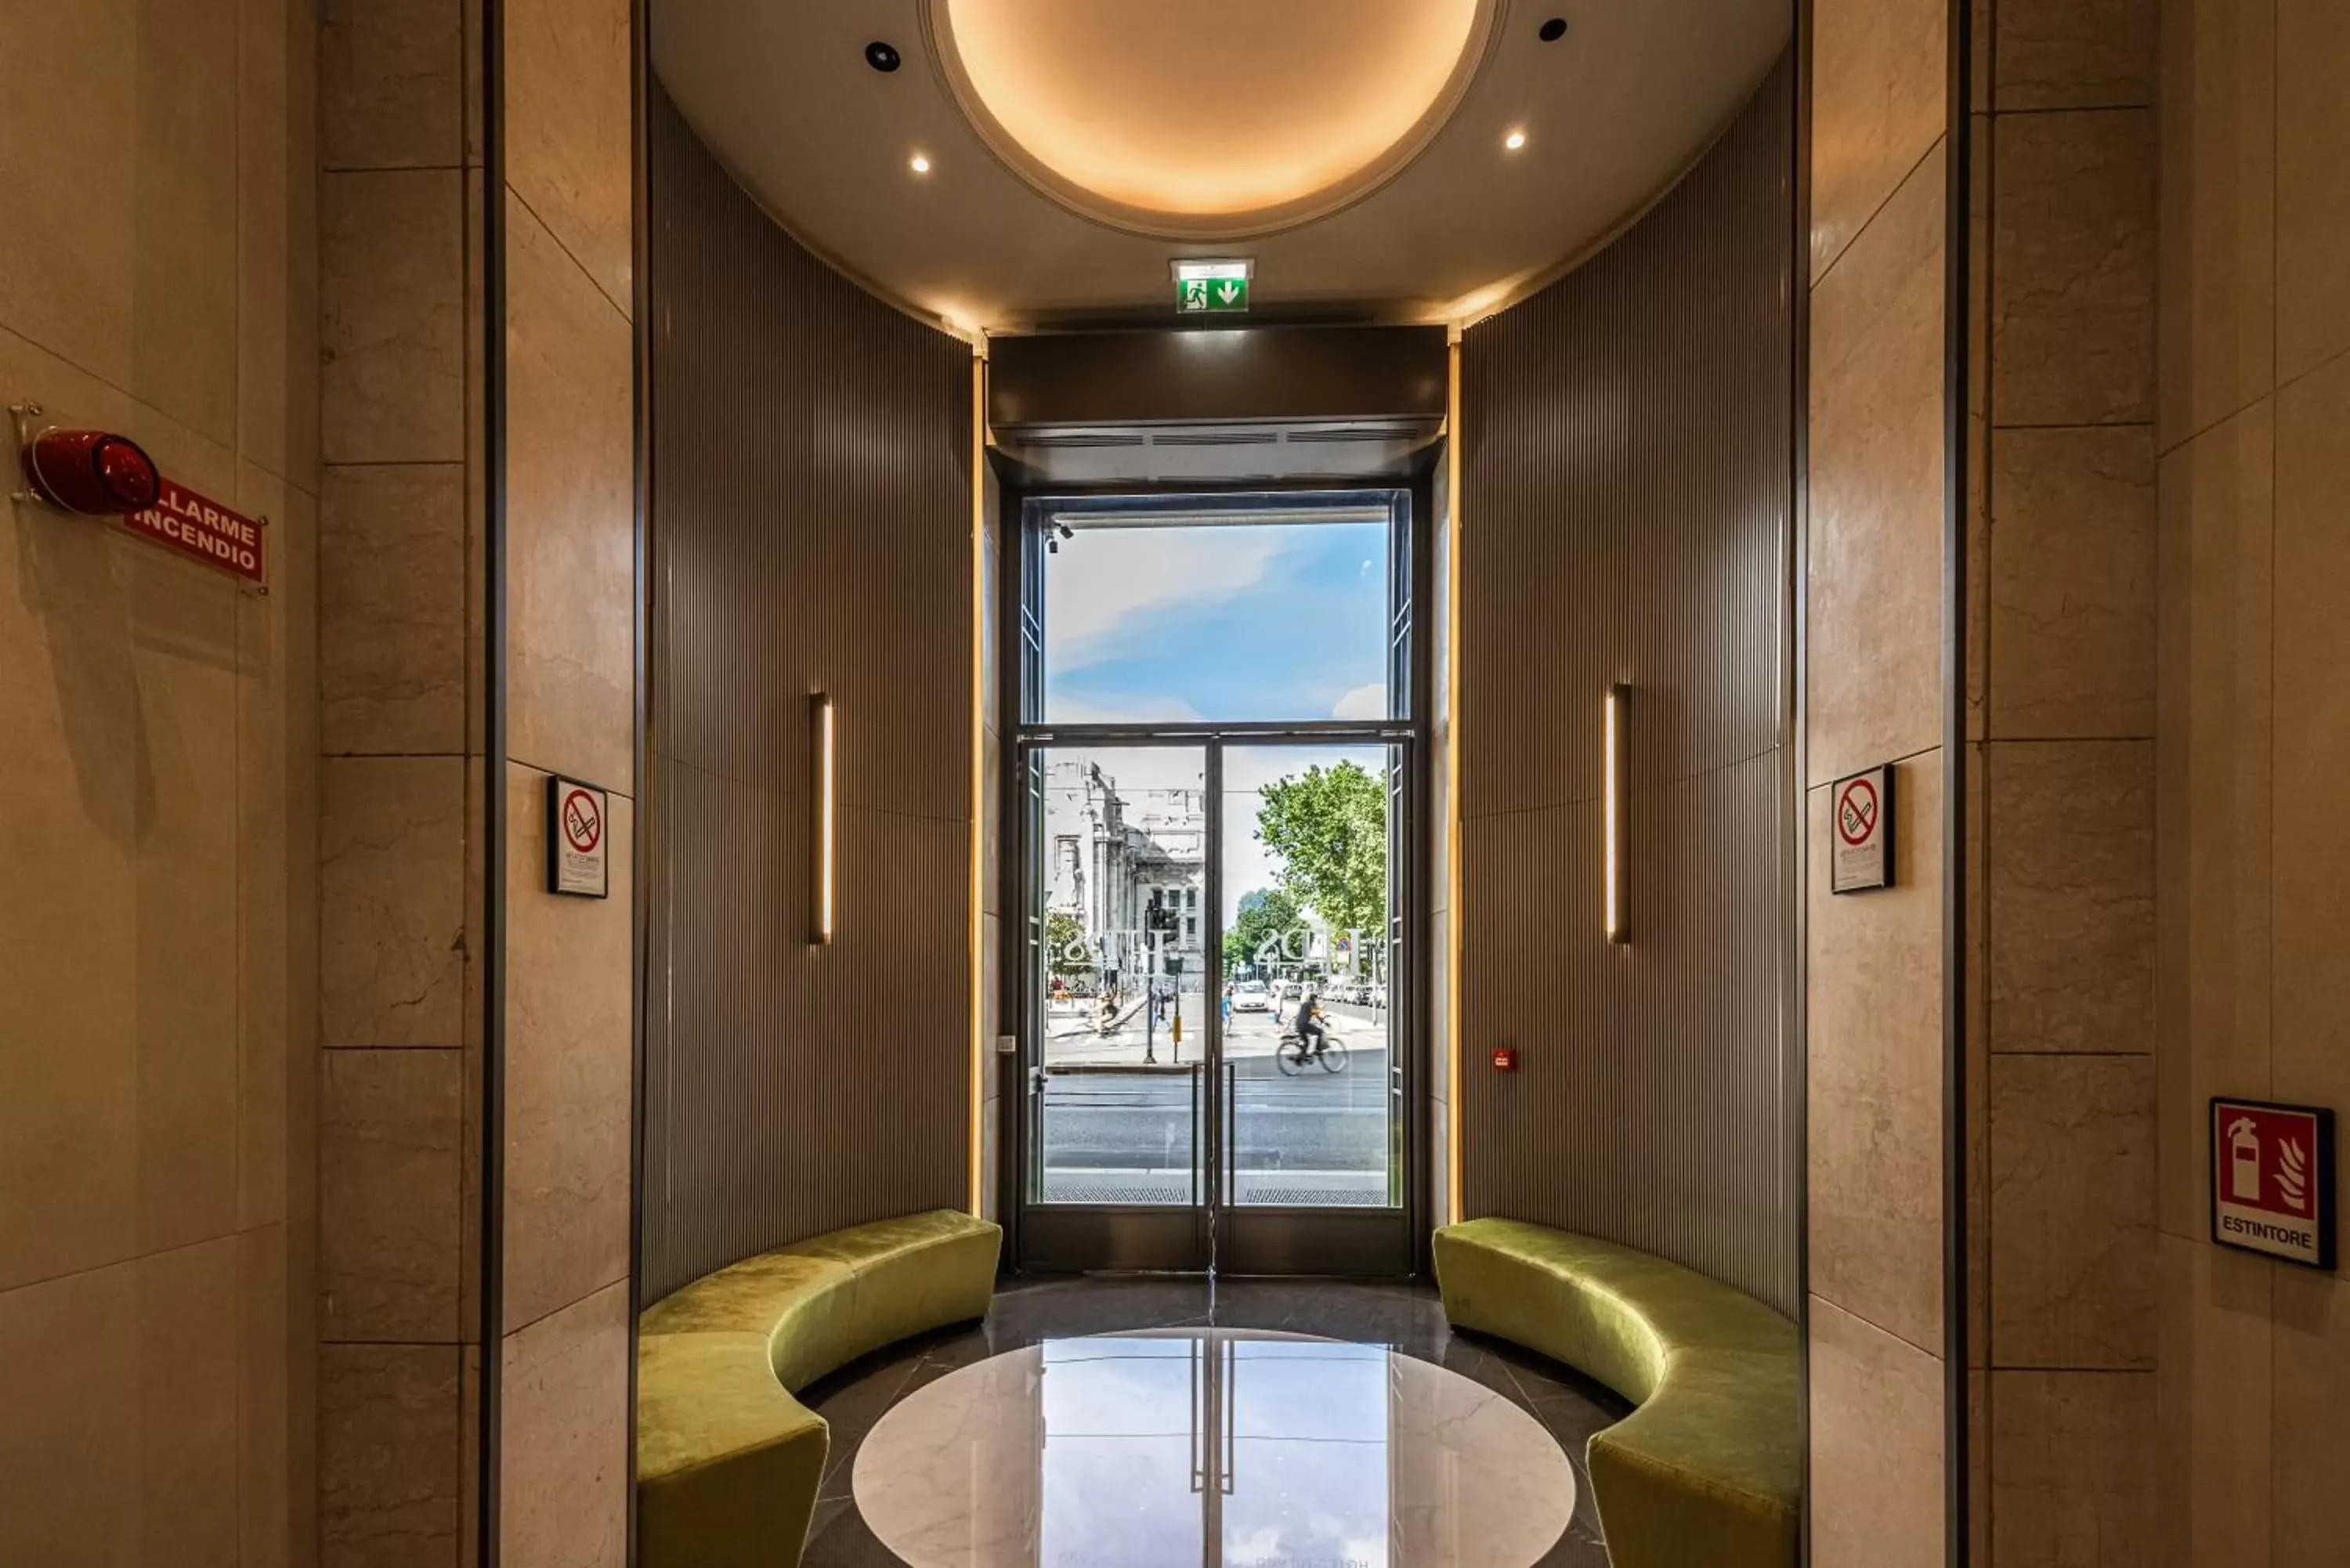 Property building in HD8 Hotel Milano